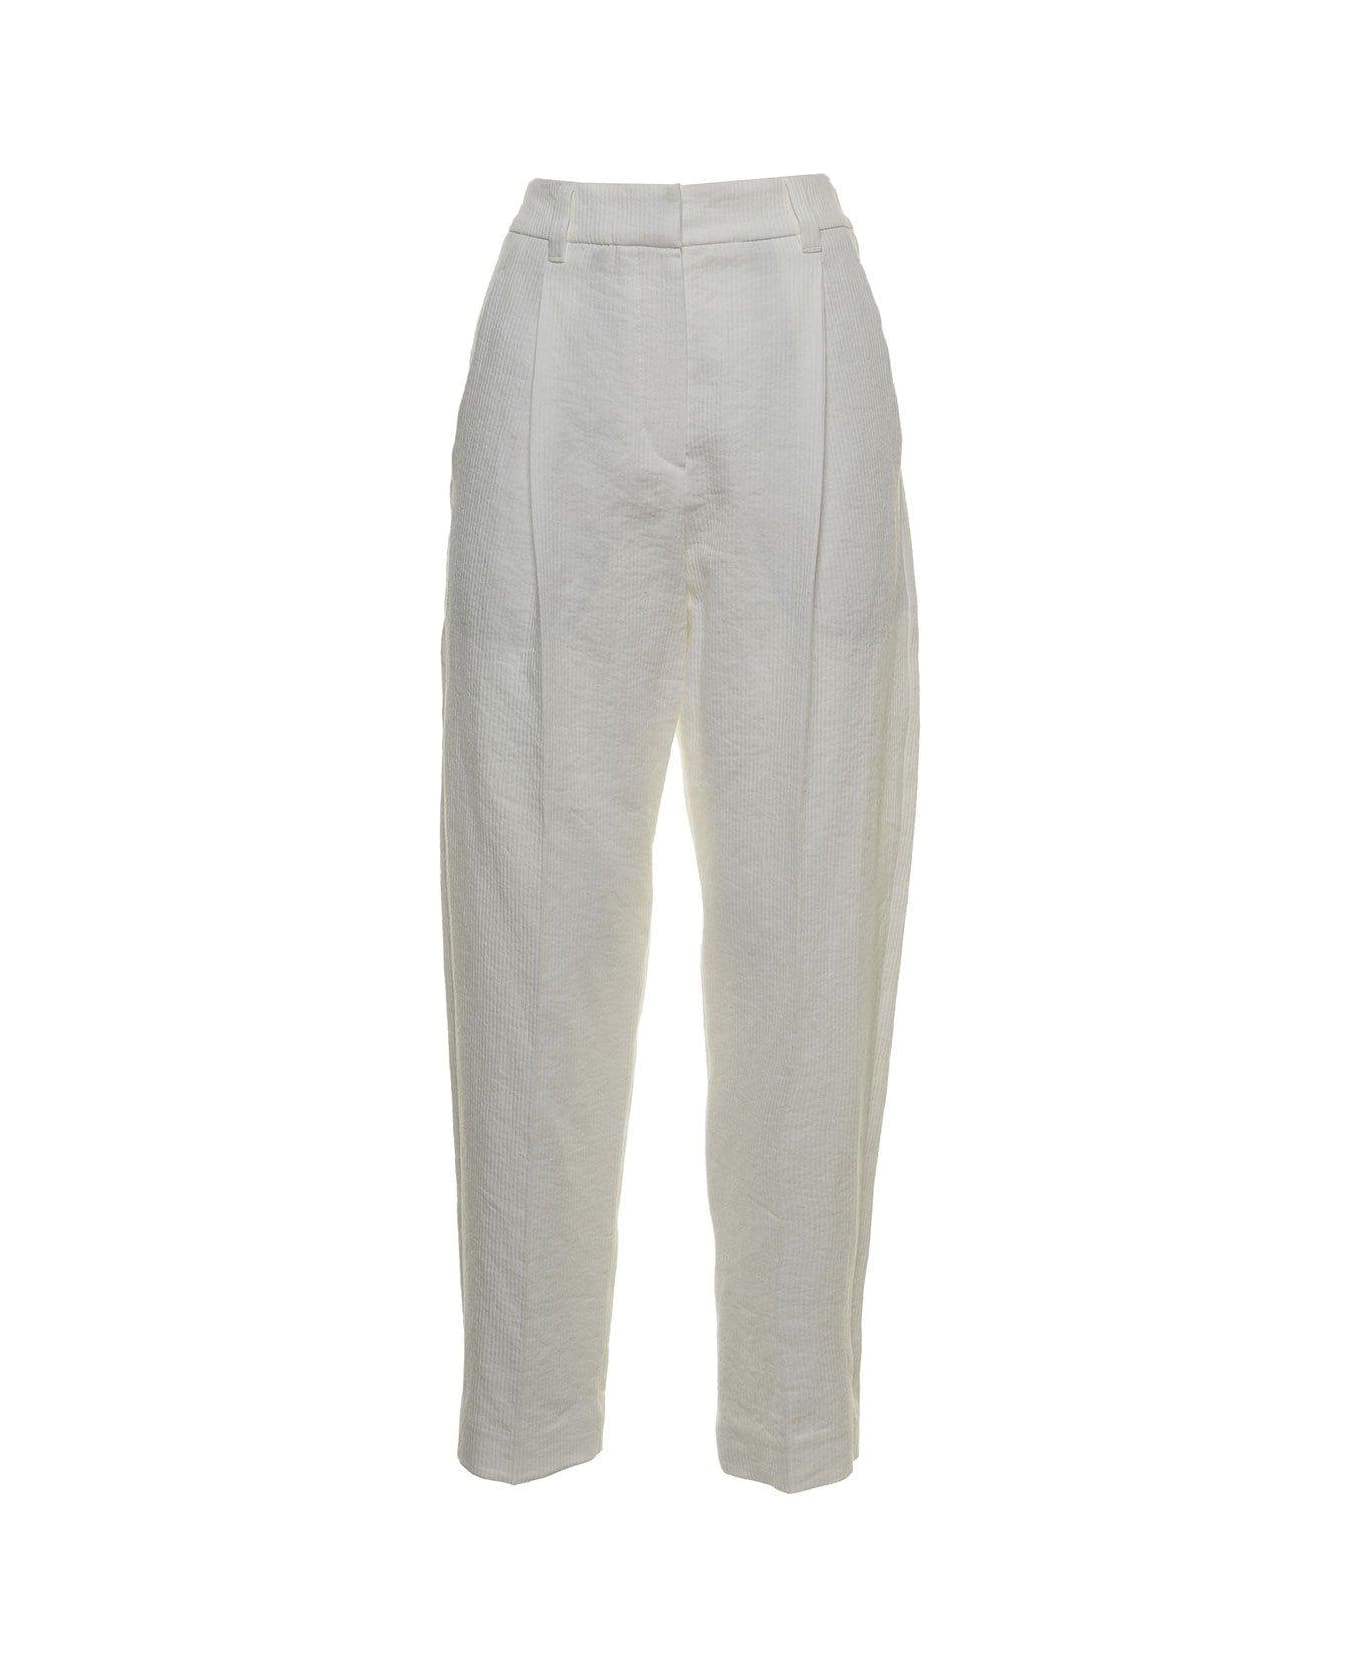 Brunello Cucinelli Pleat Detailed Tapered Pants - White ボトムス